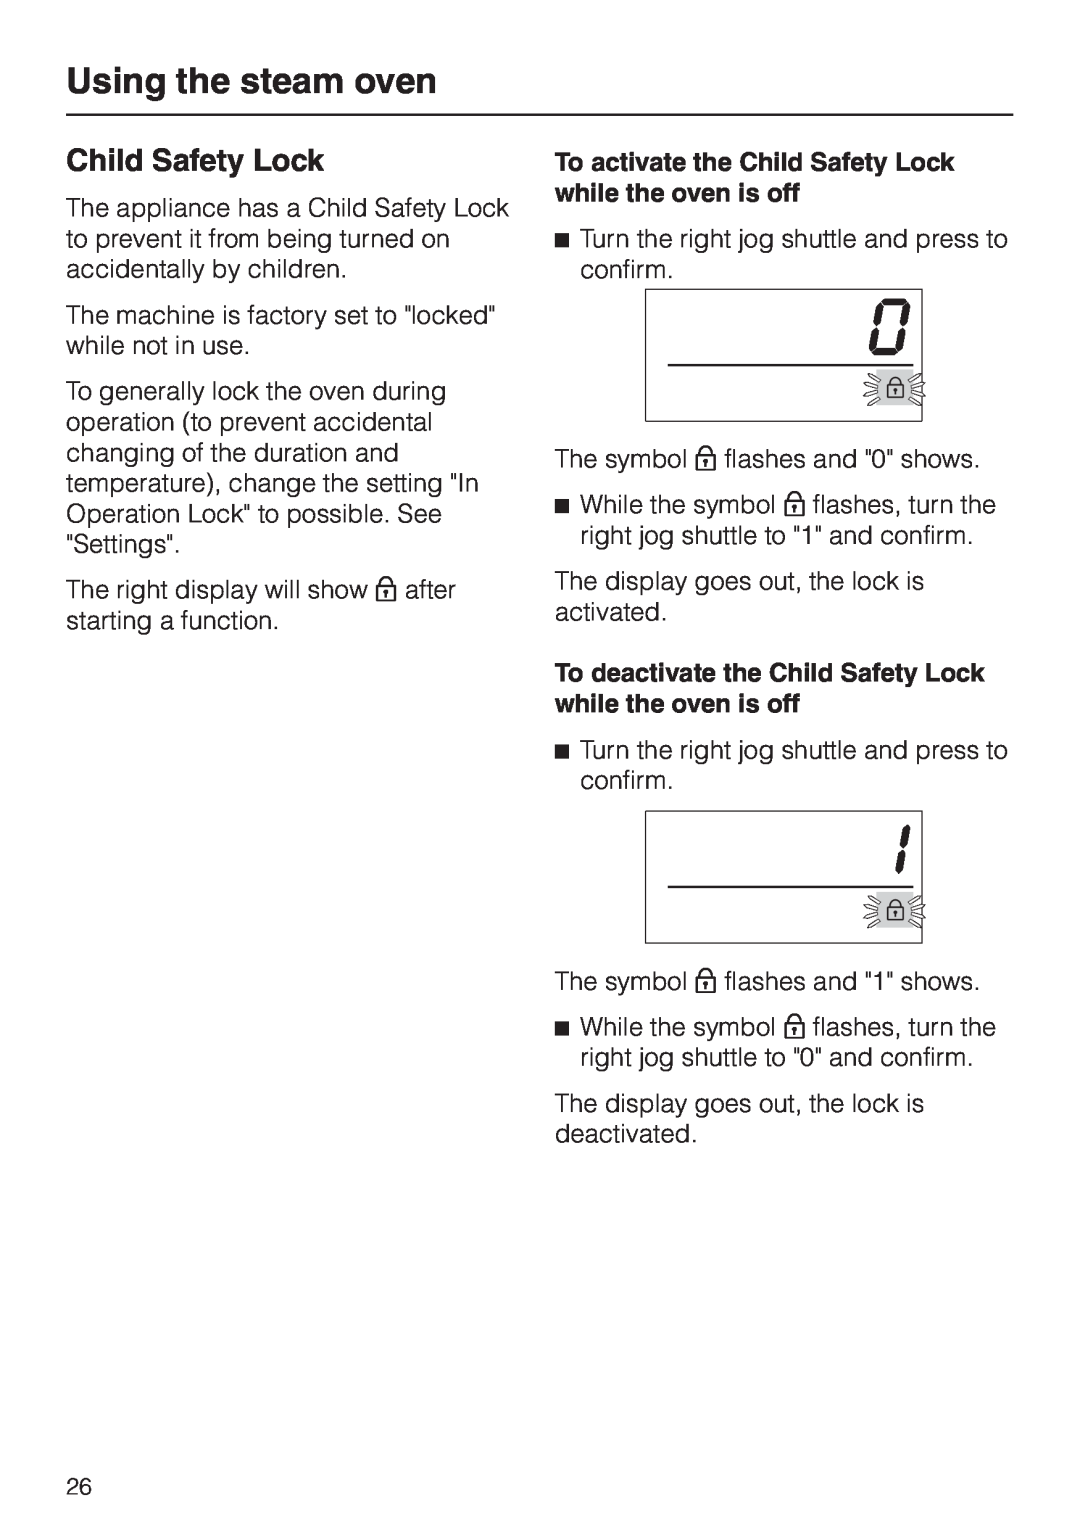 Miele DG 2661 installation instructions Child Safety Lock, Using the steam oven 